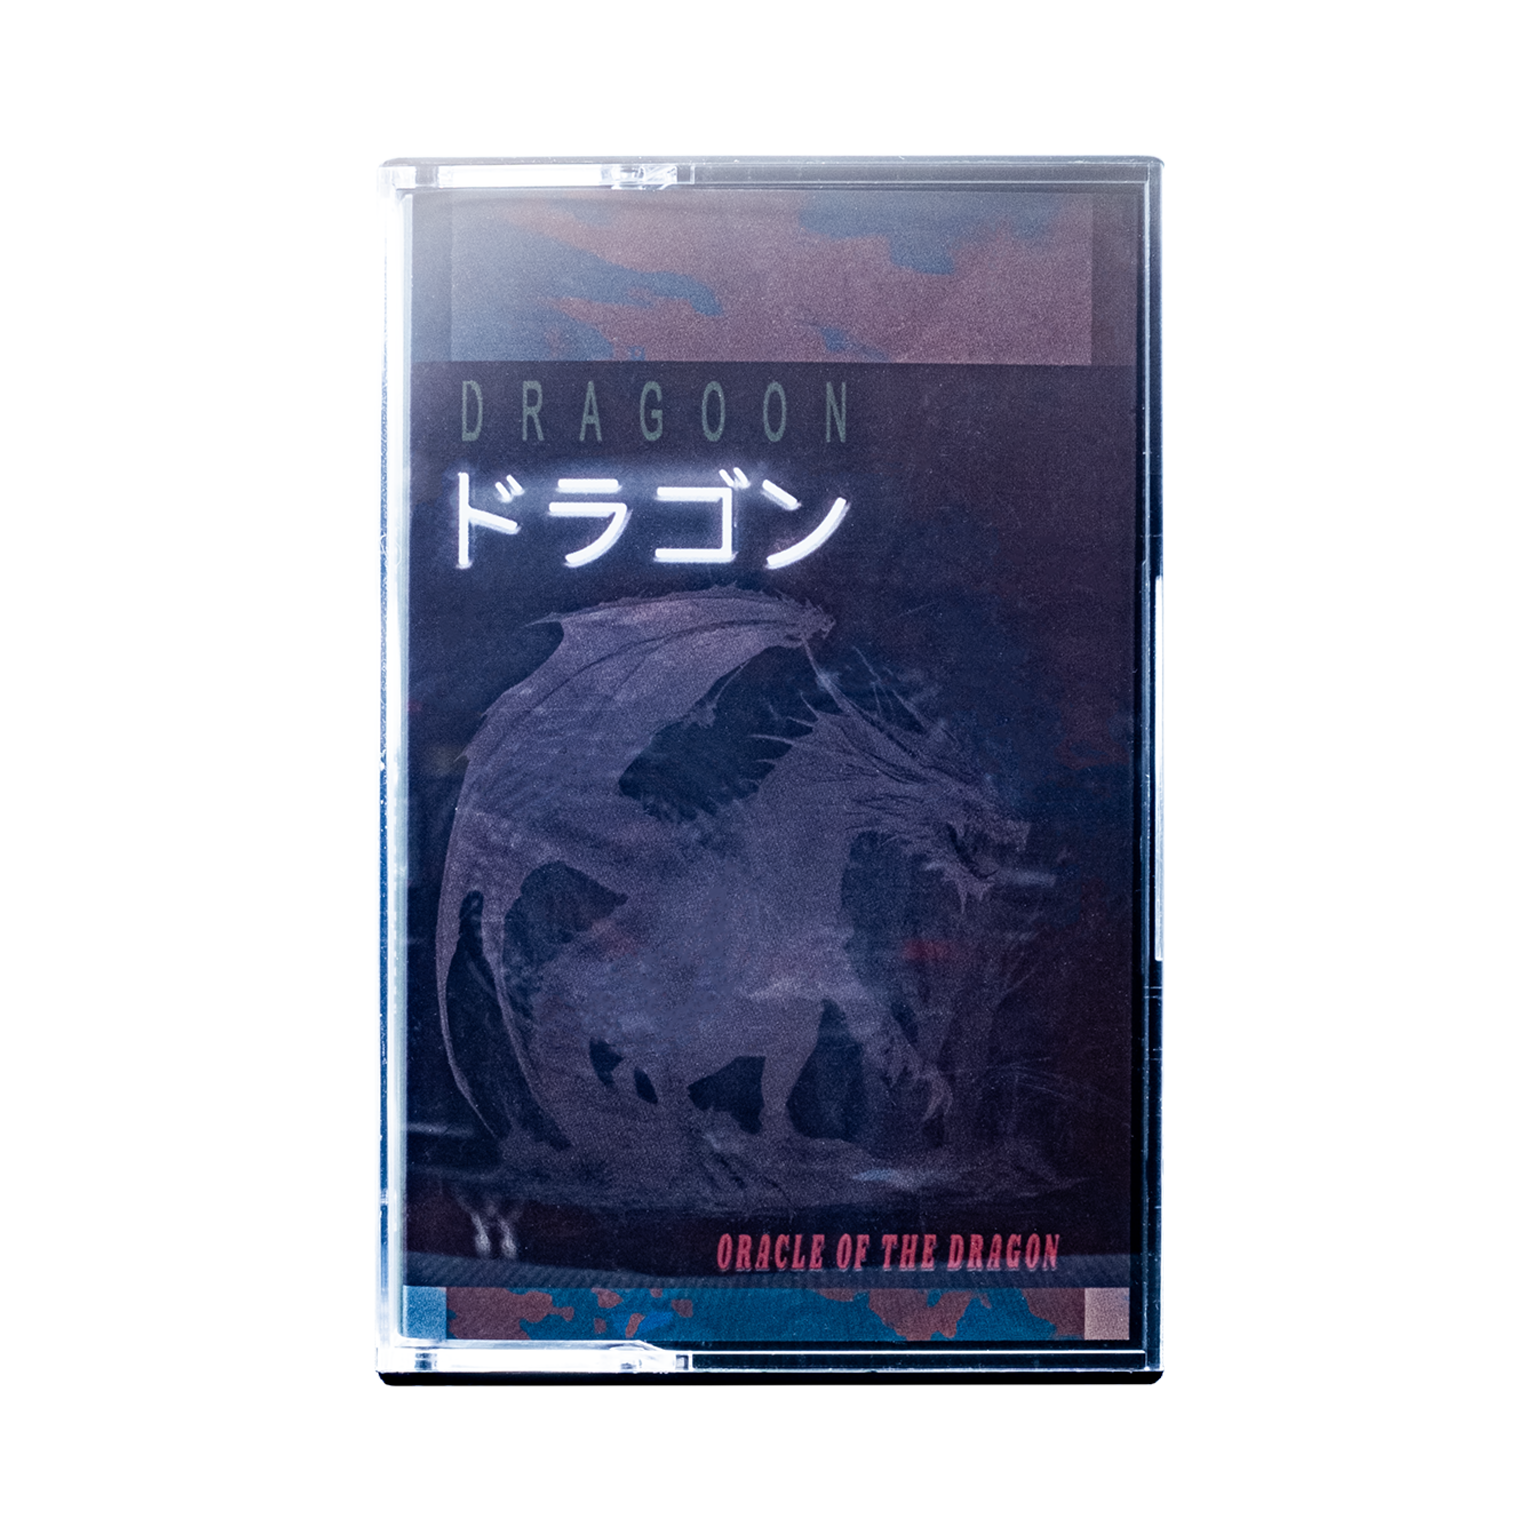 DRAGOON - Oracle Of The Dragon (Cassette)